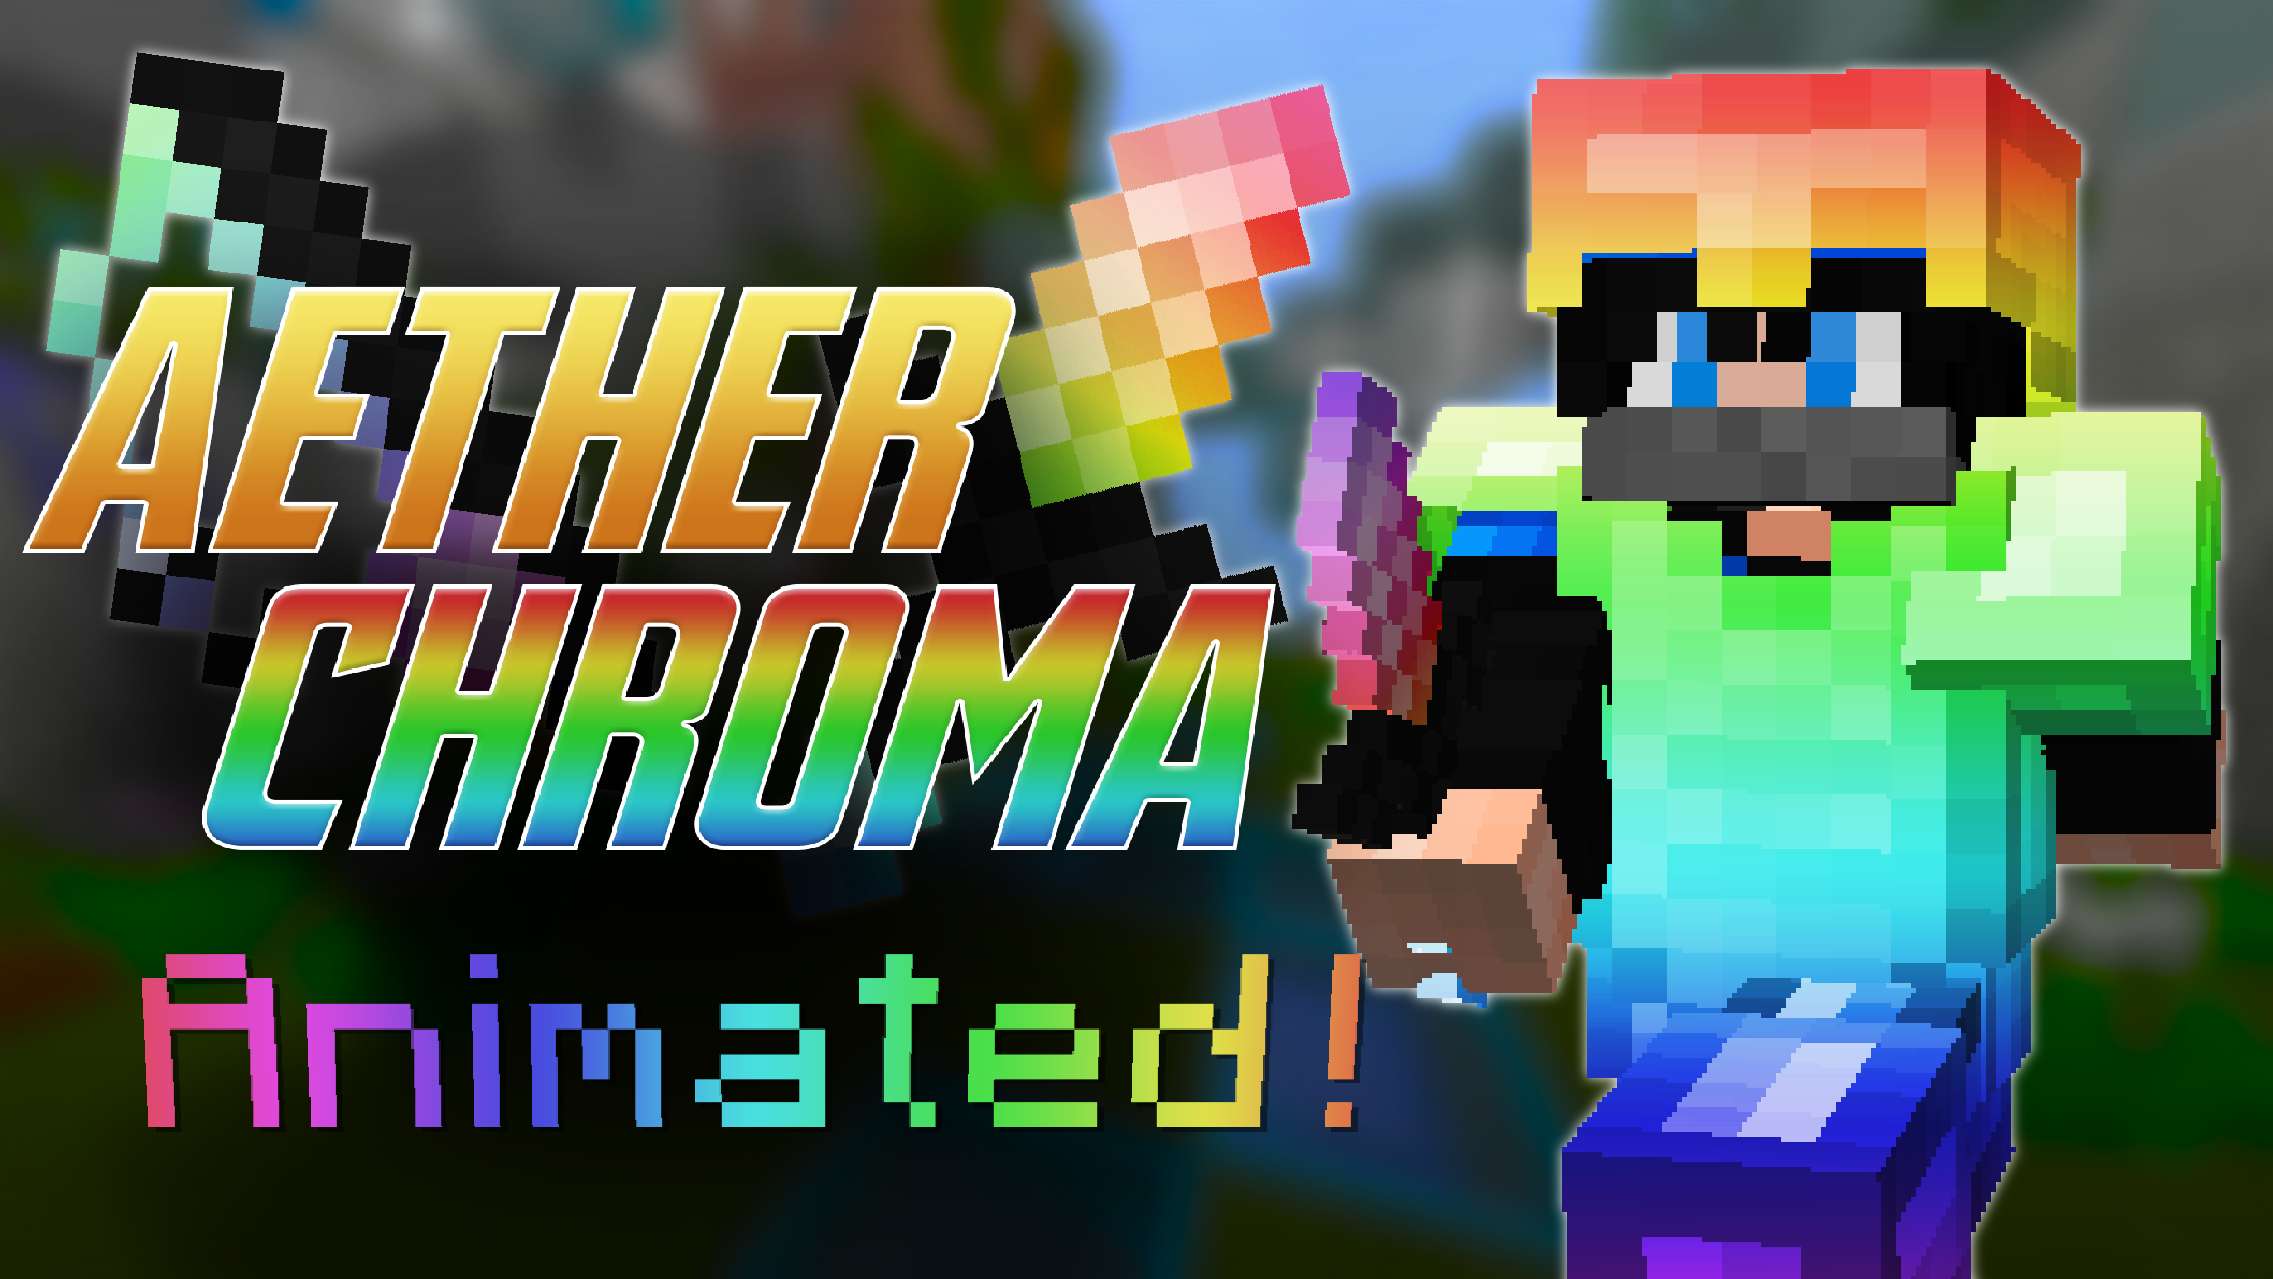 Aether Chroma 256x 256 by Mqryo on PvPRP